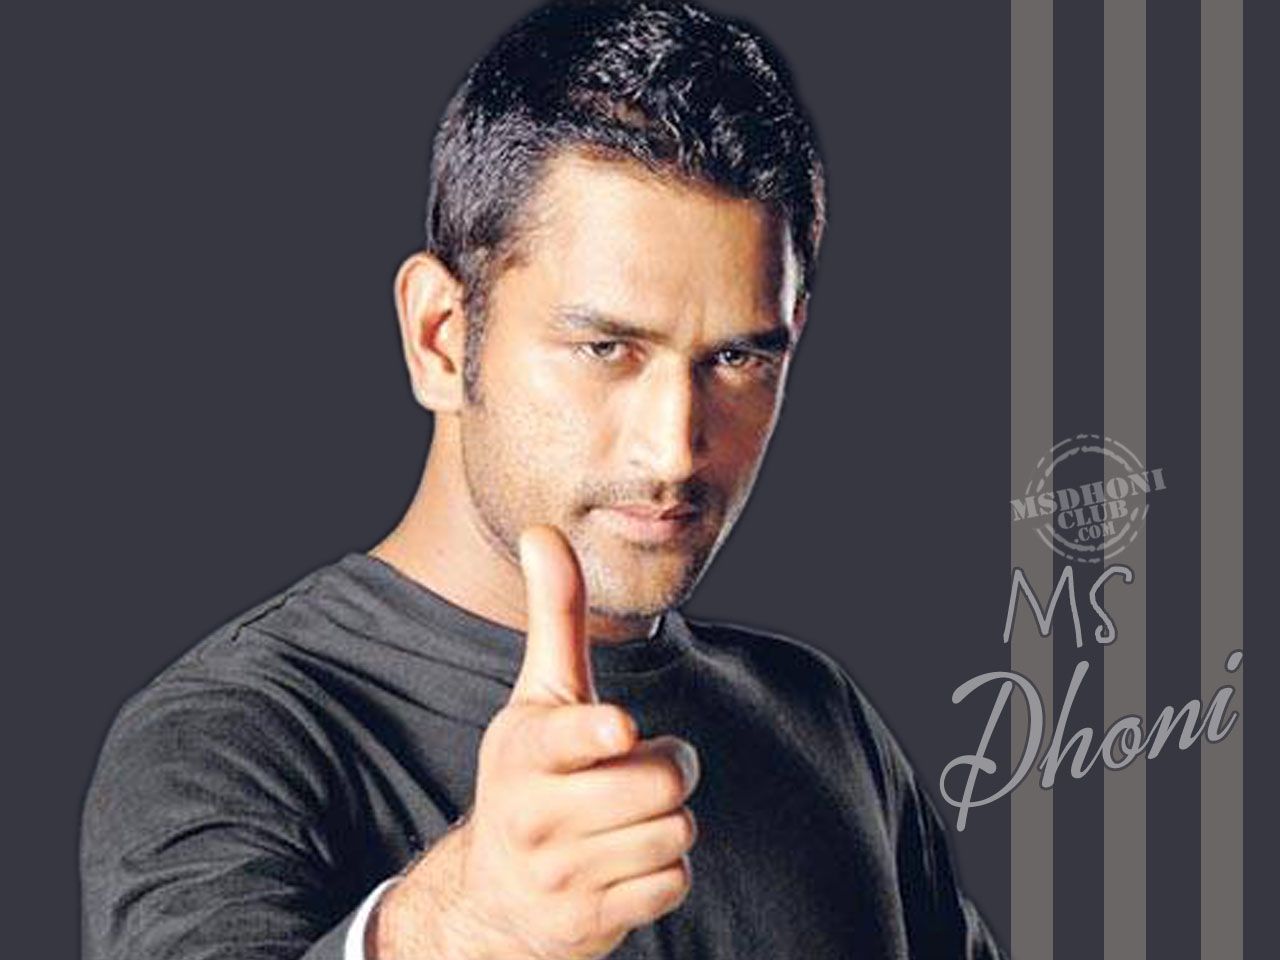 HD wallpaper of MS Dhoni ♥ - MS Dhoni - The One Man Army | Facebook